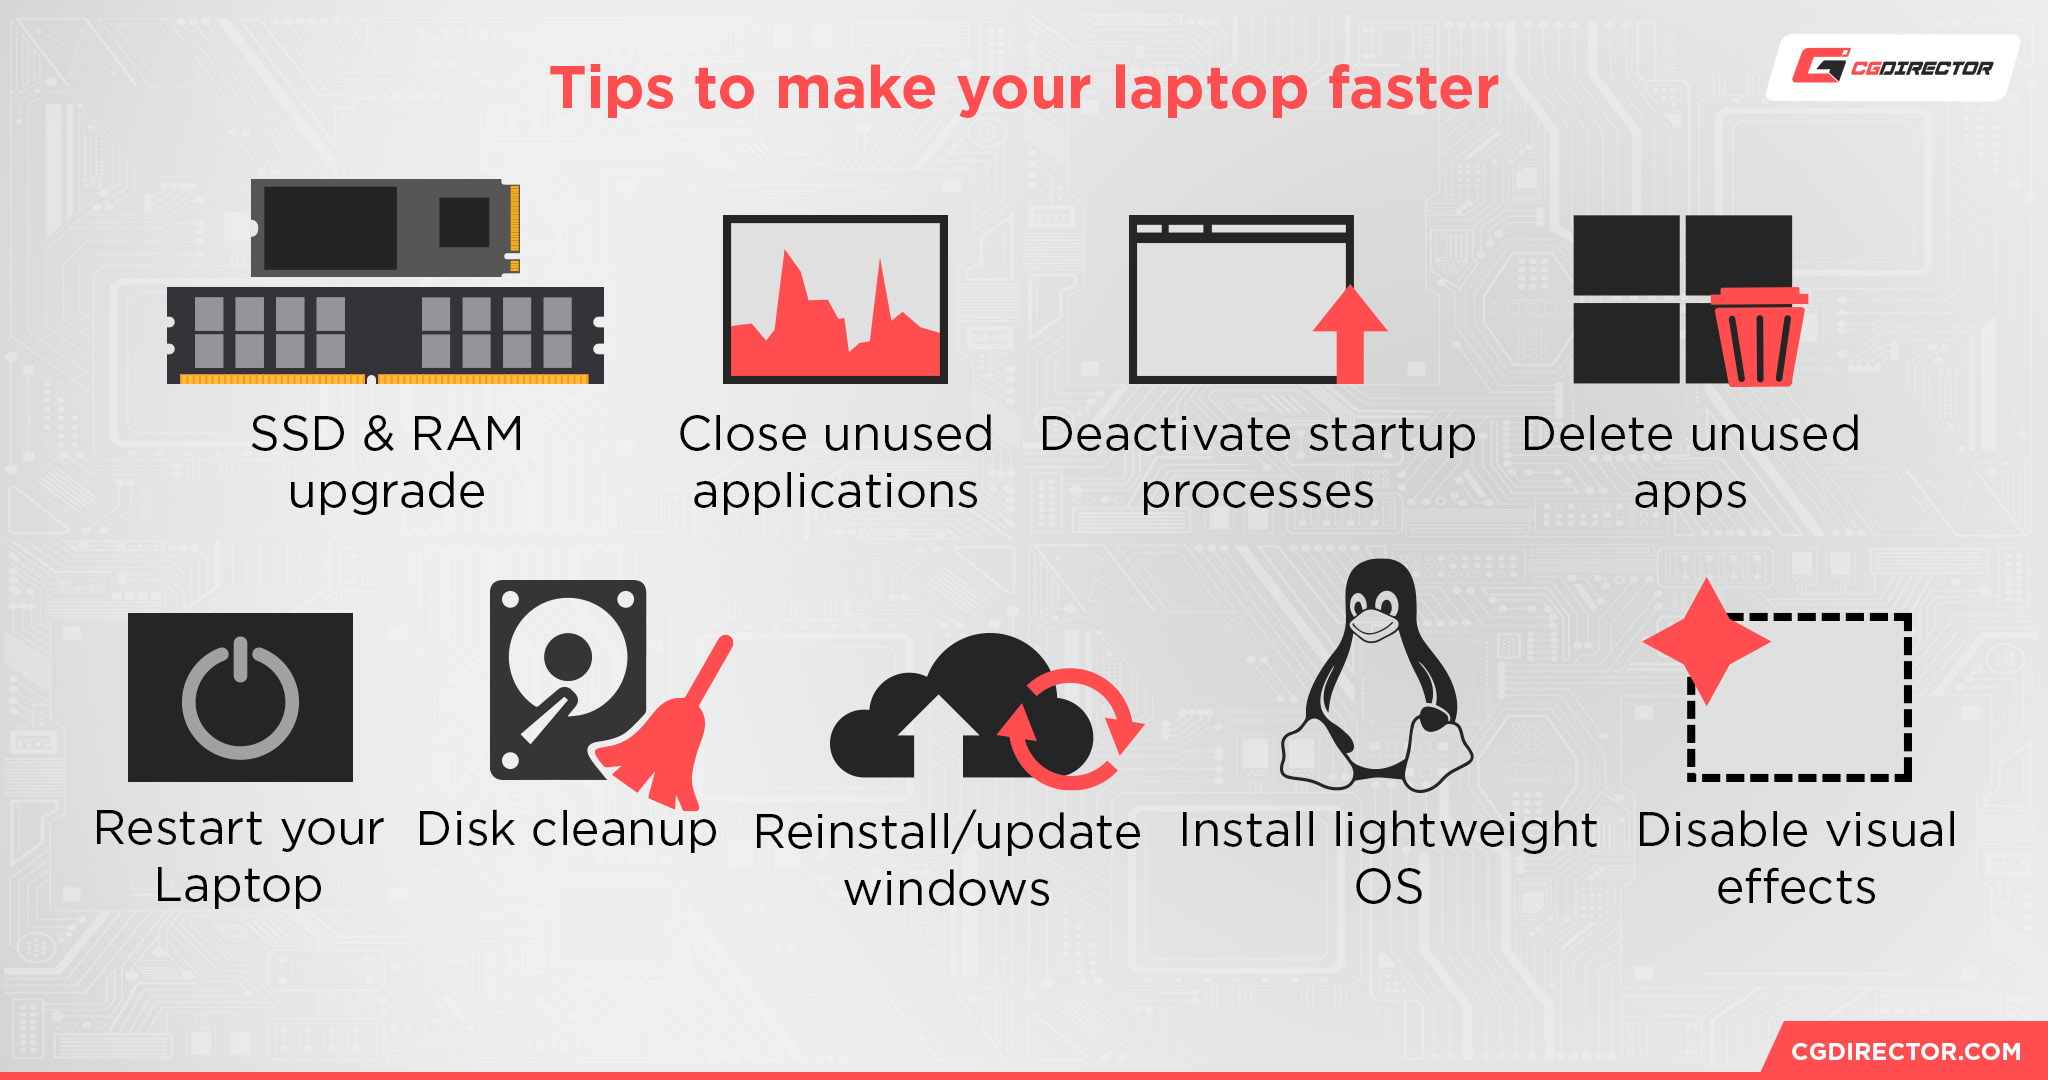 Tips to make your laptop faster